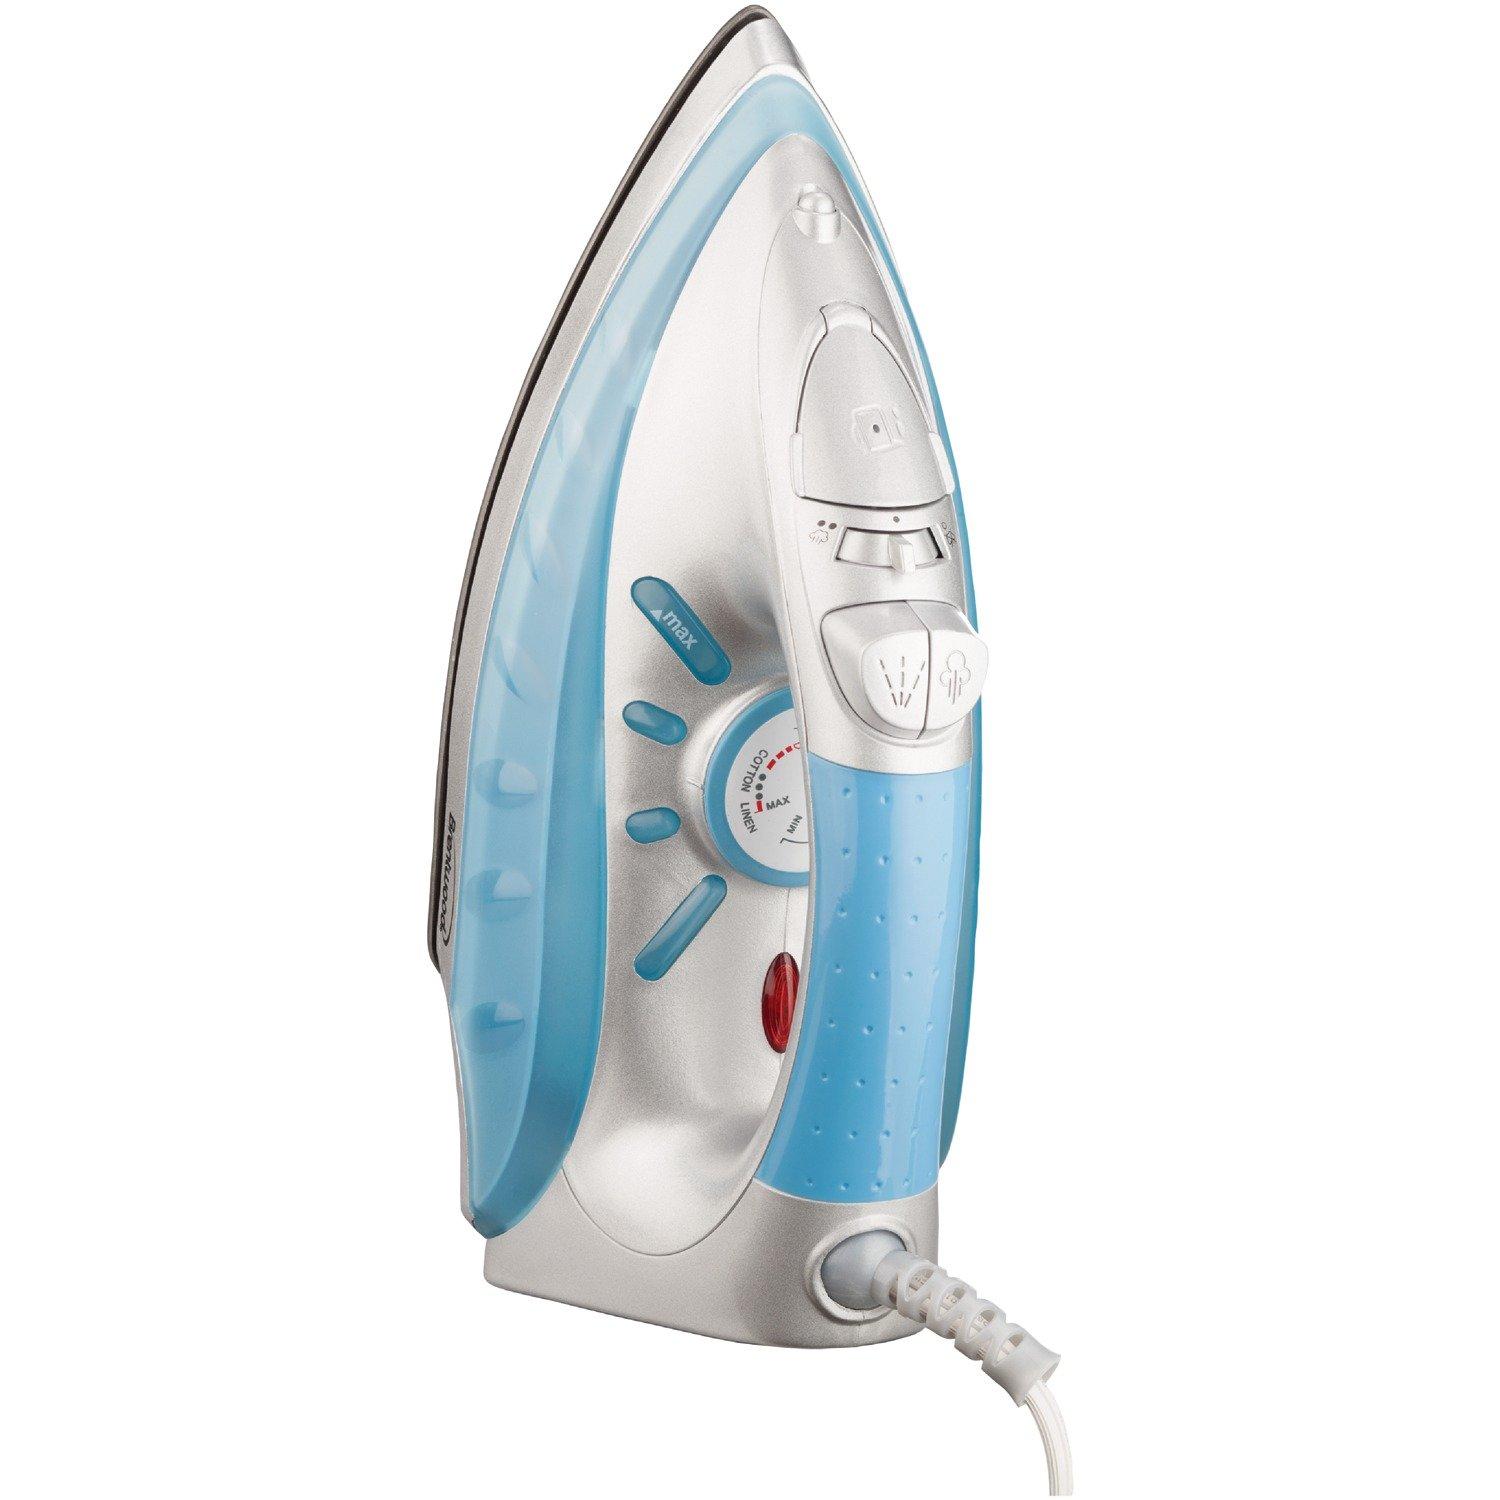 BRENTWOOD® MPI- 60 FULL-SIZE NONSTICK STEAM IRON (Silver)